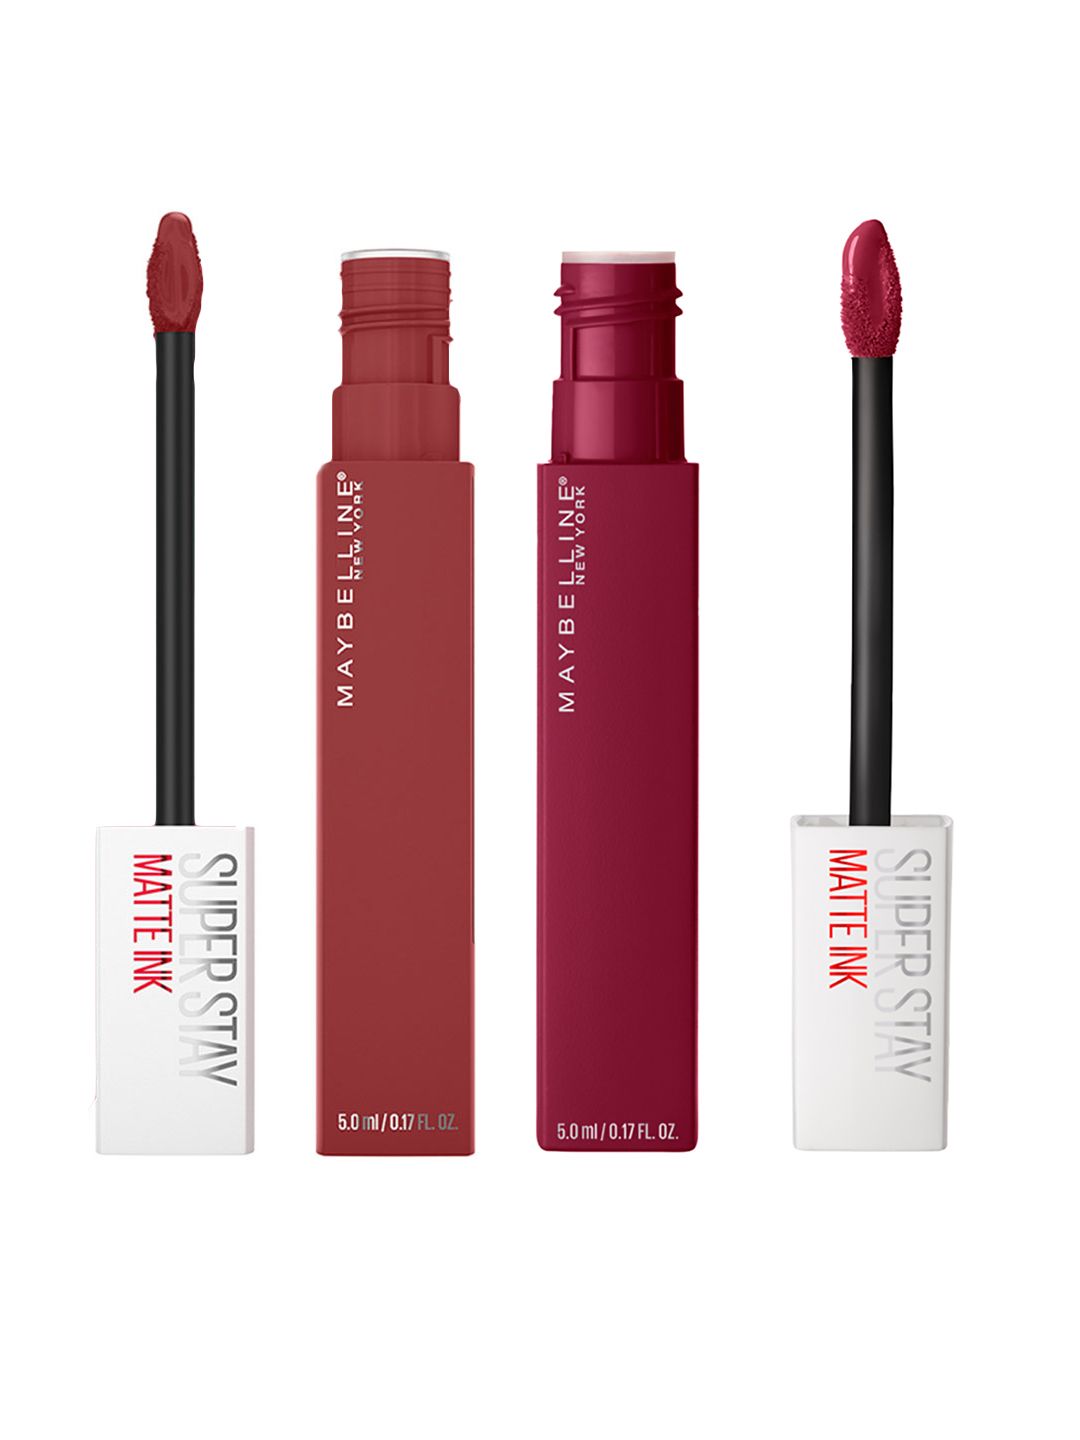 Maybelline New York Set of 2 Super Stay Matte Ink Lipsticks- Initiator 170 & Founder 115 Price in India